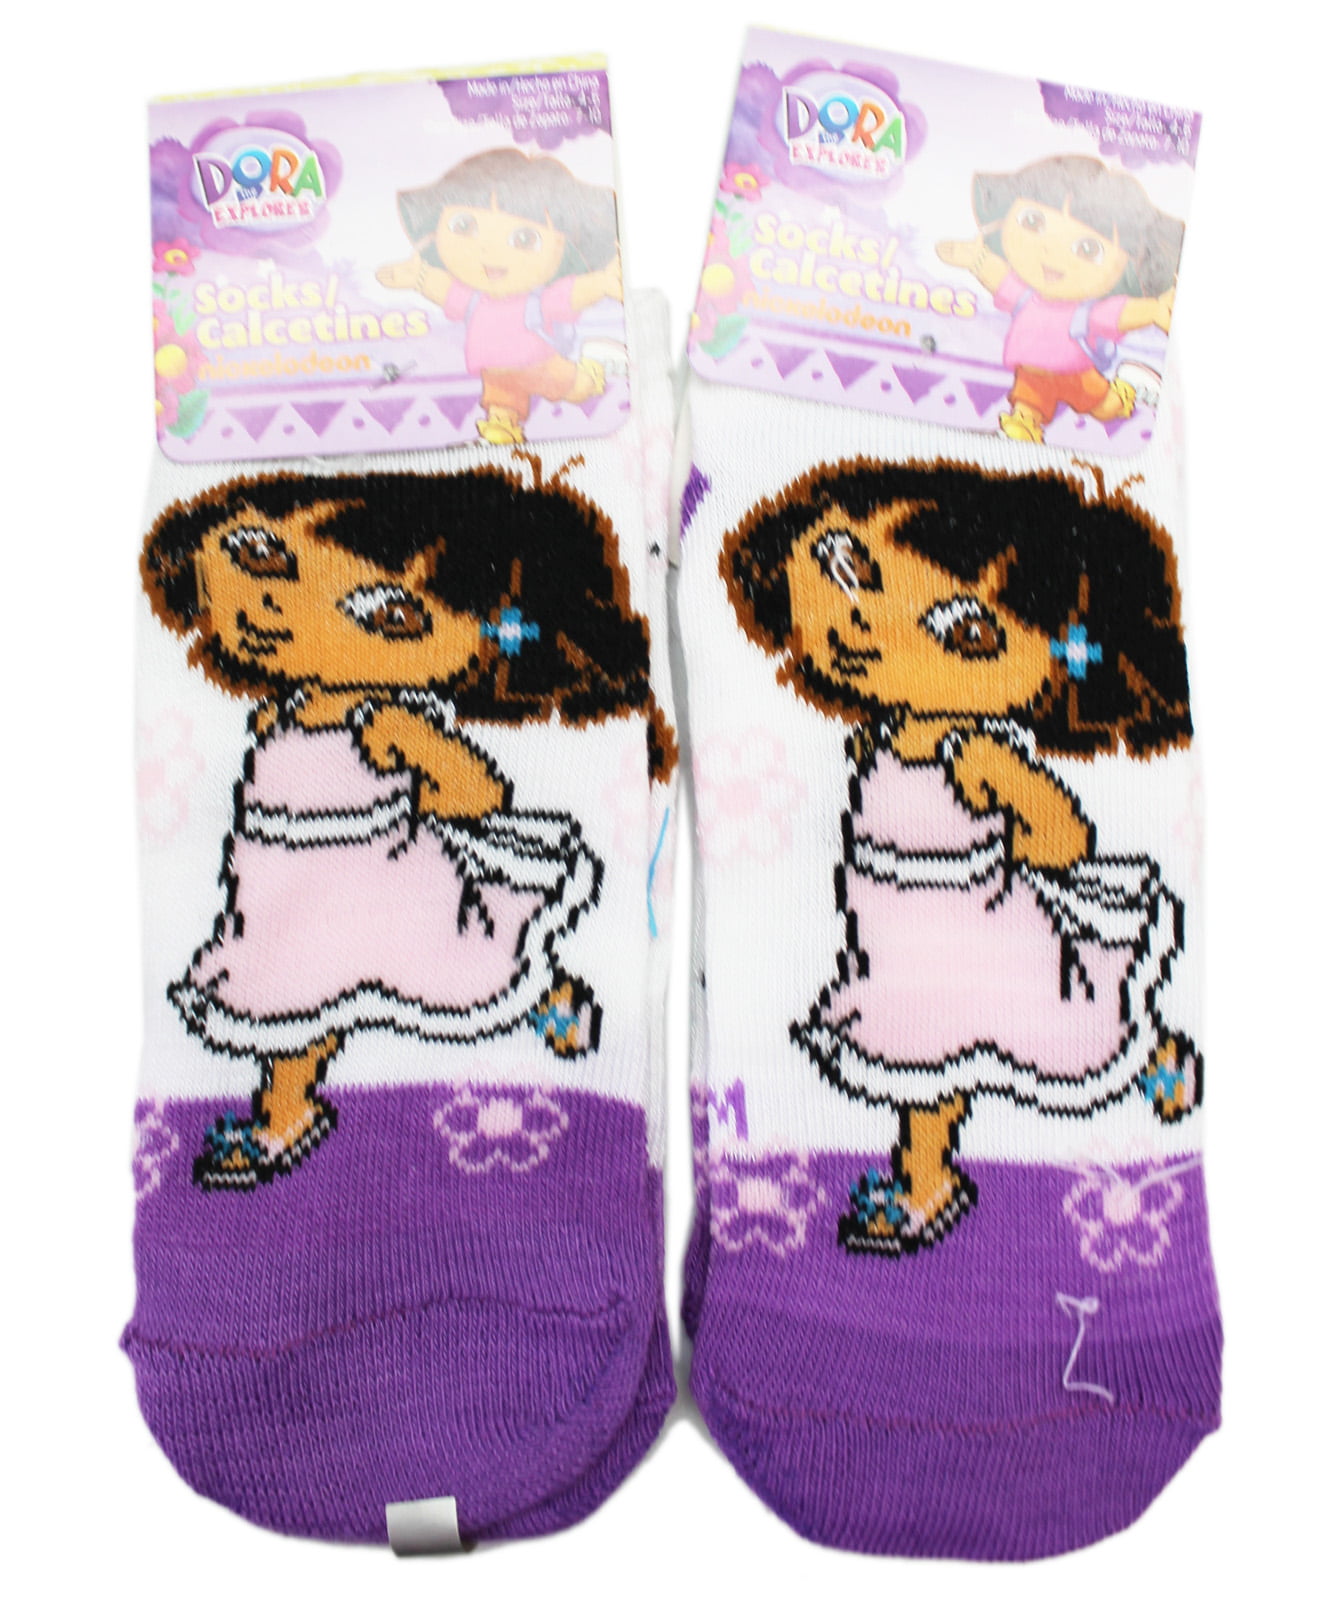 Max Grey Kids Socks 3 Pair ~ Size 6-8 Violet Purple with Stripes White with Blue 